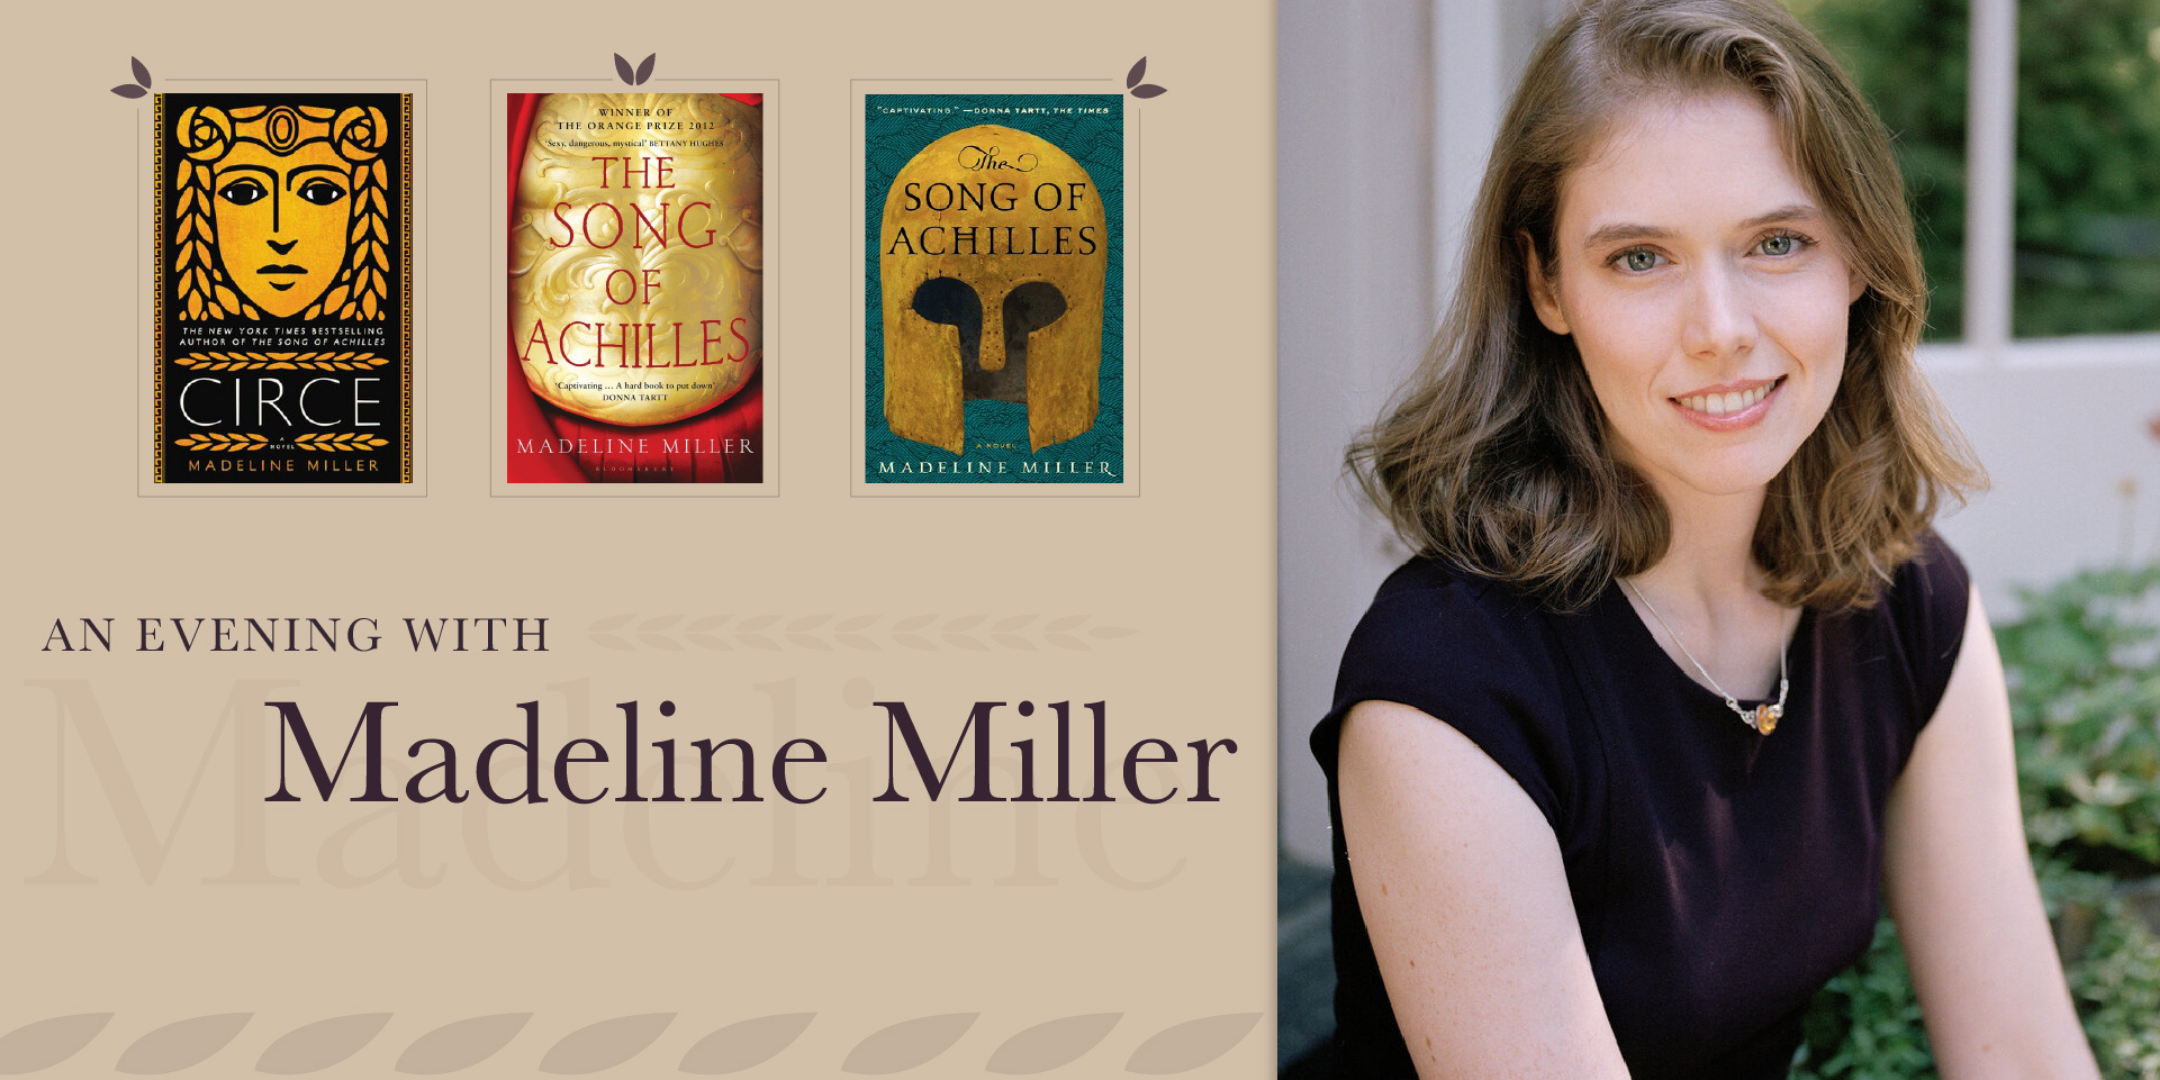 Madeline Miller - The Author